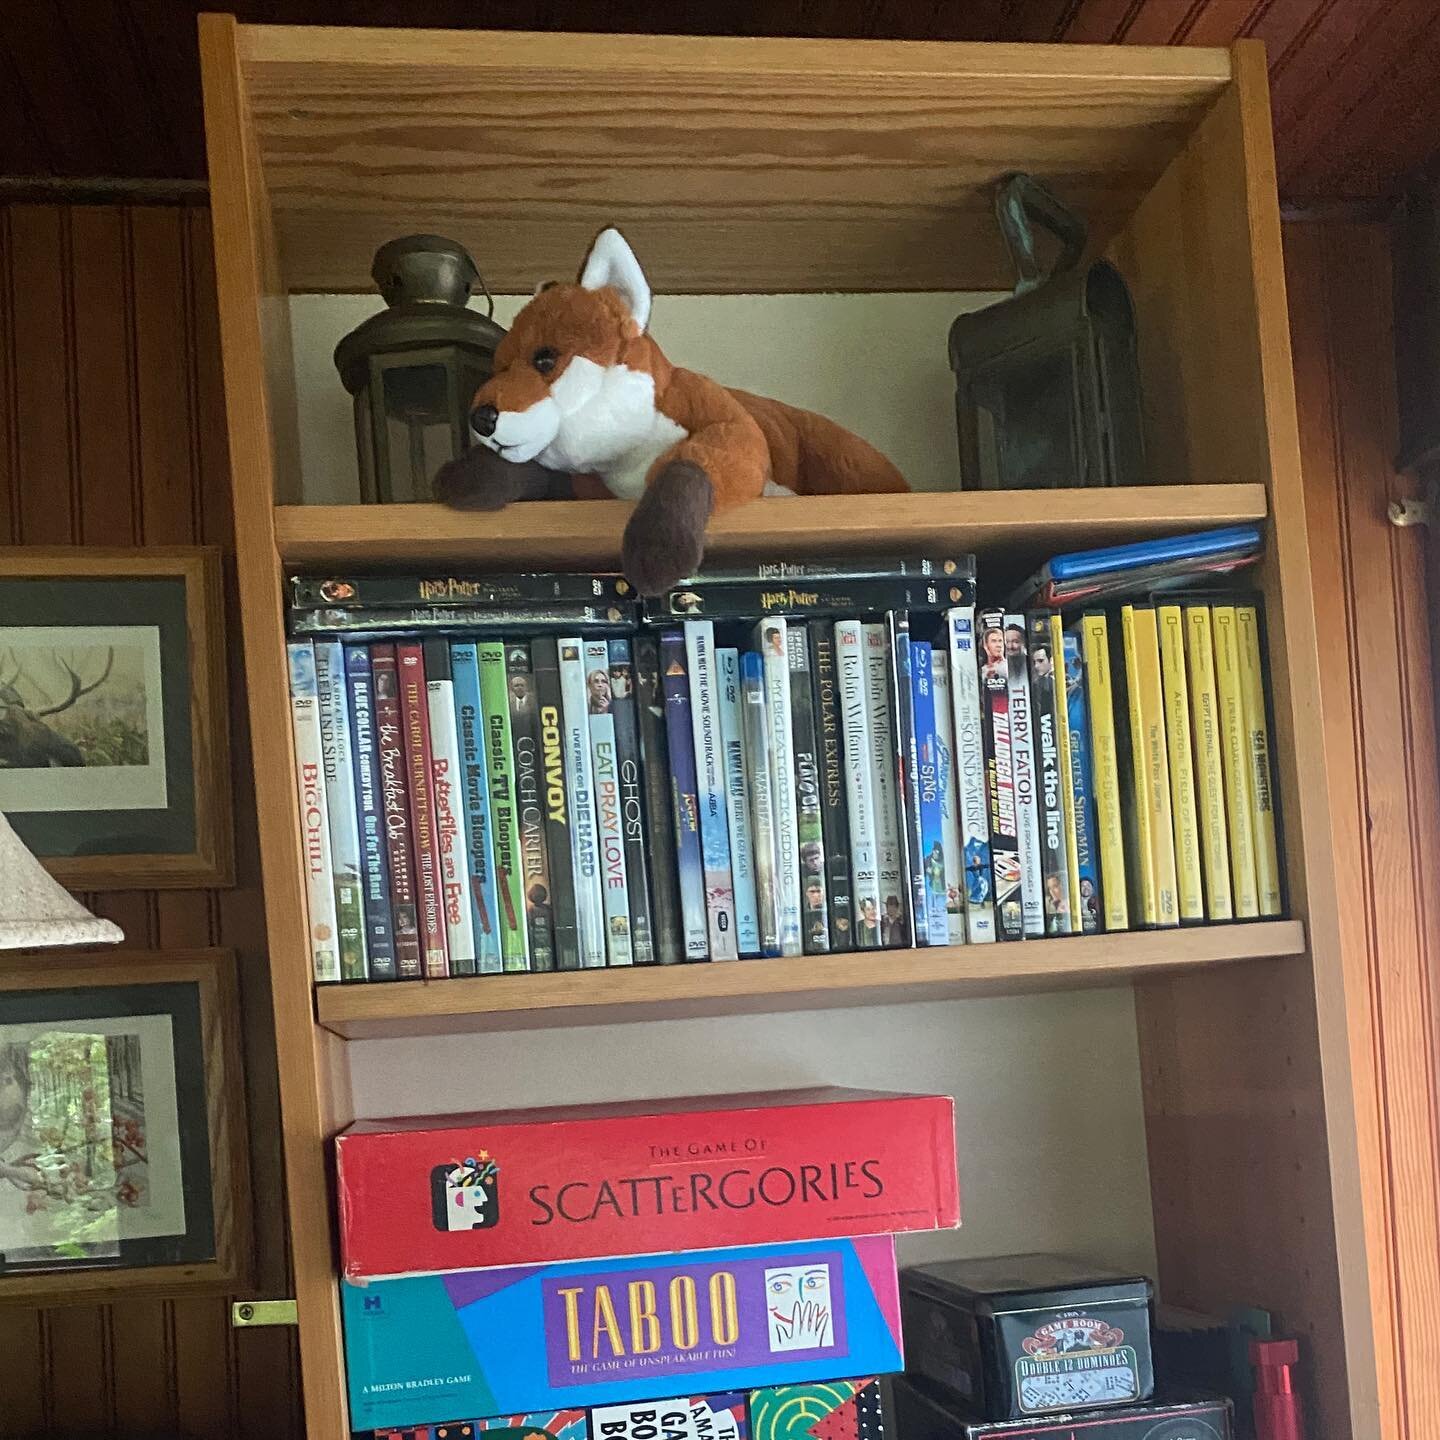 Being that we are the Fox Creek Inn, we have several foxes as decor. See if you can spot them all when you book a stay with us!
&bull;&bull;
We would love to see how many you can find! 🦊
#fox #inn #vermont #bedandbreakfast #vt #foxcreekinn